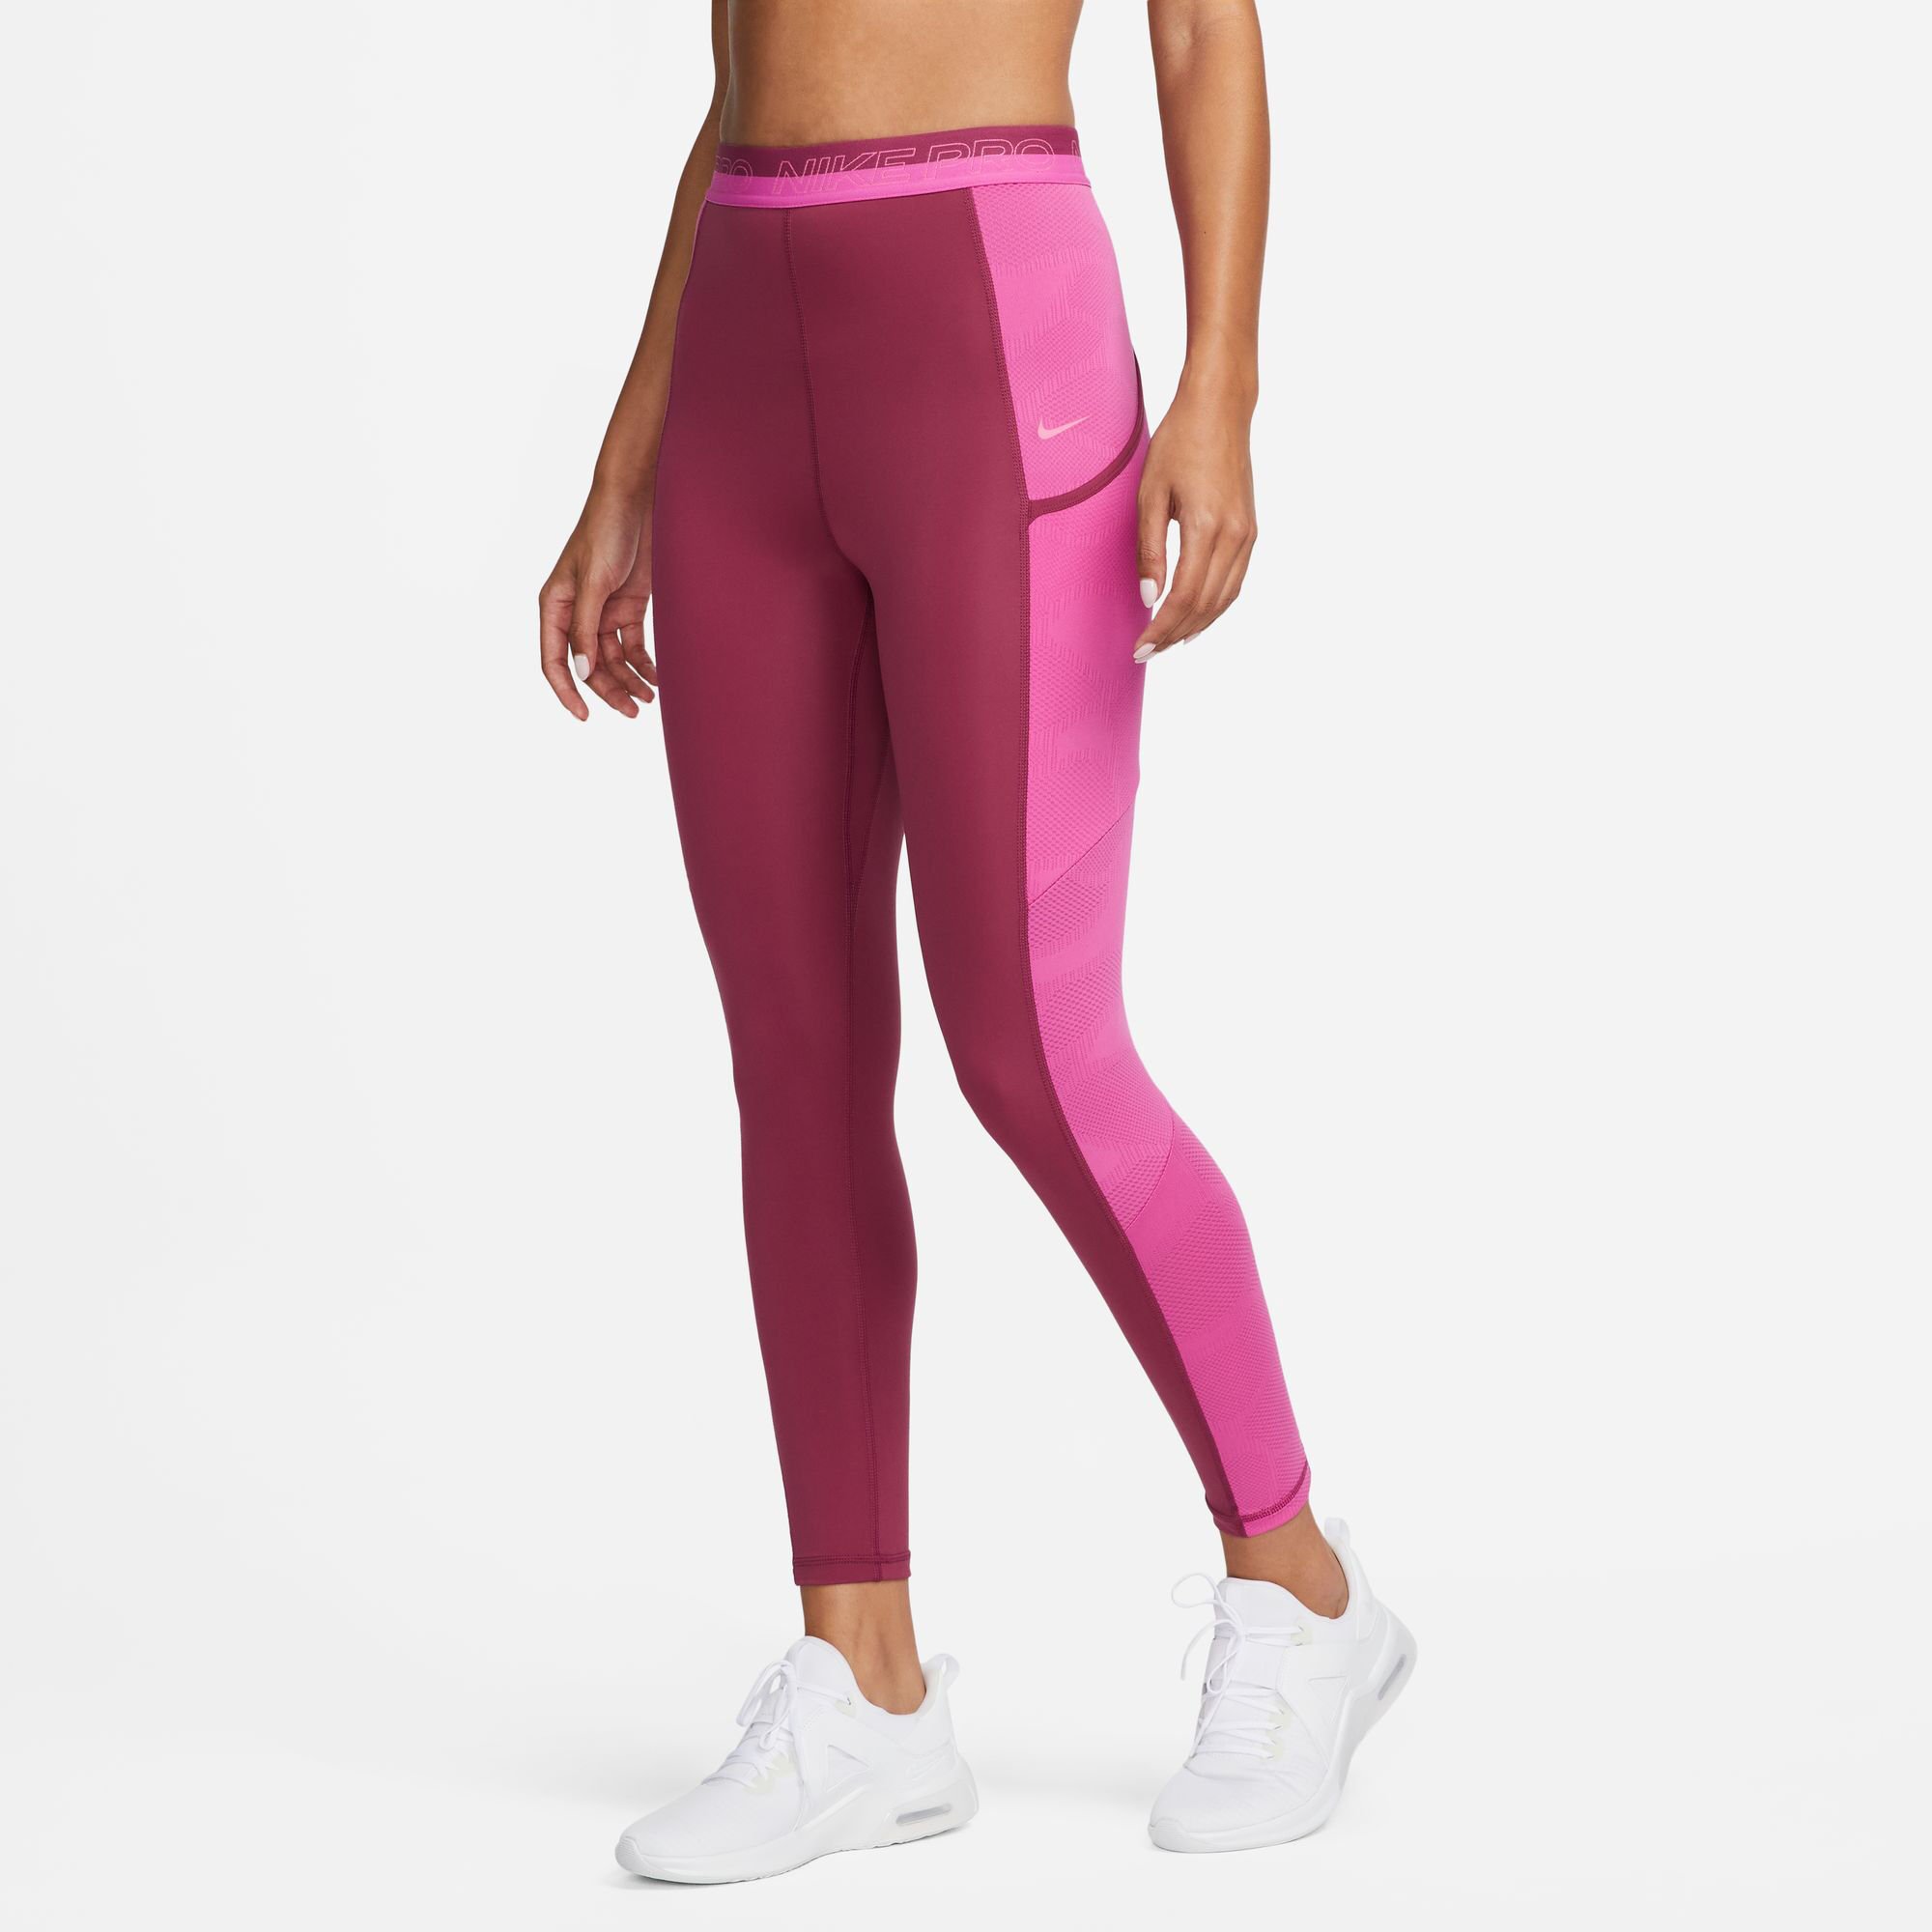 Buy Nike Dri-Fit Performance Heritage Tight Women Red, Pink online